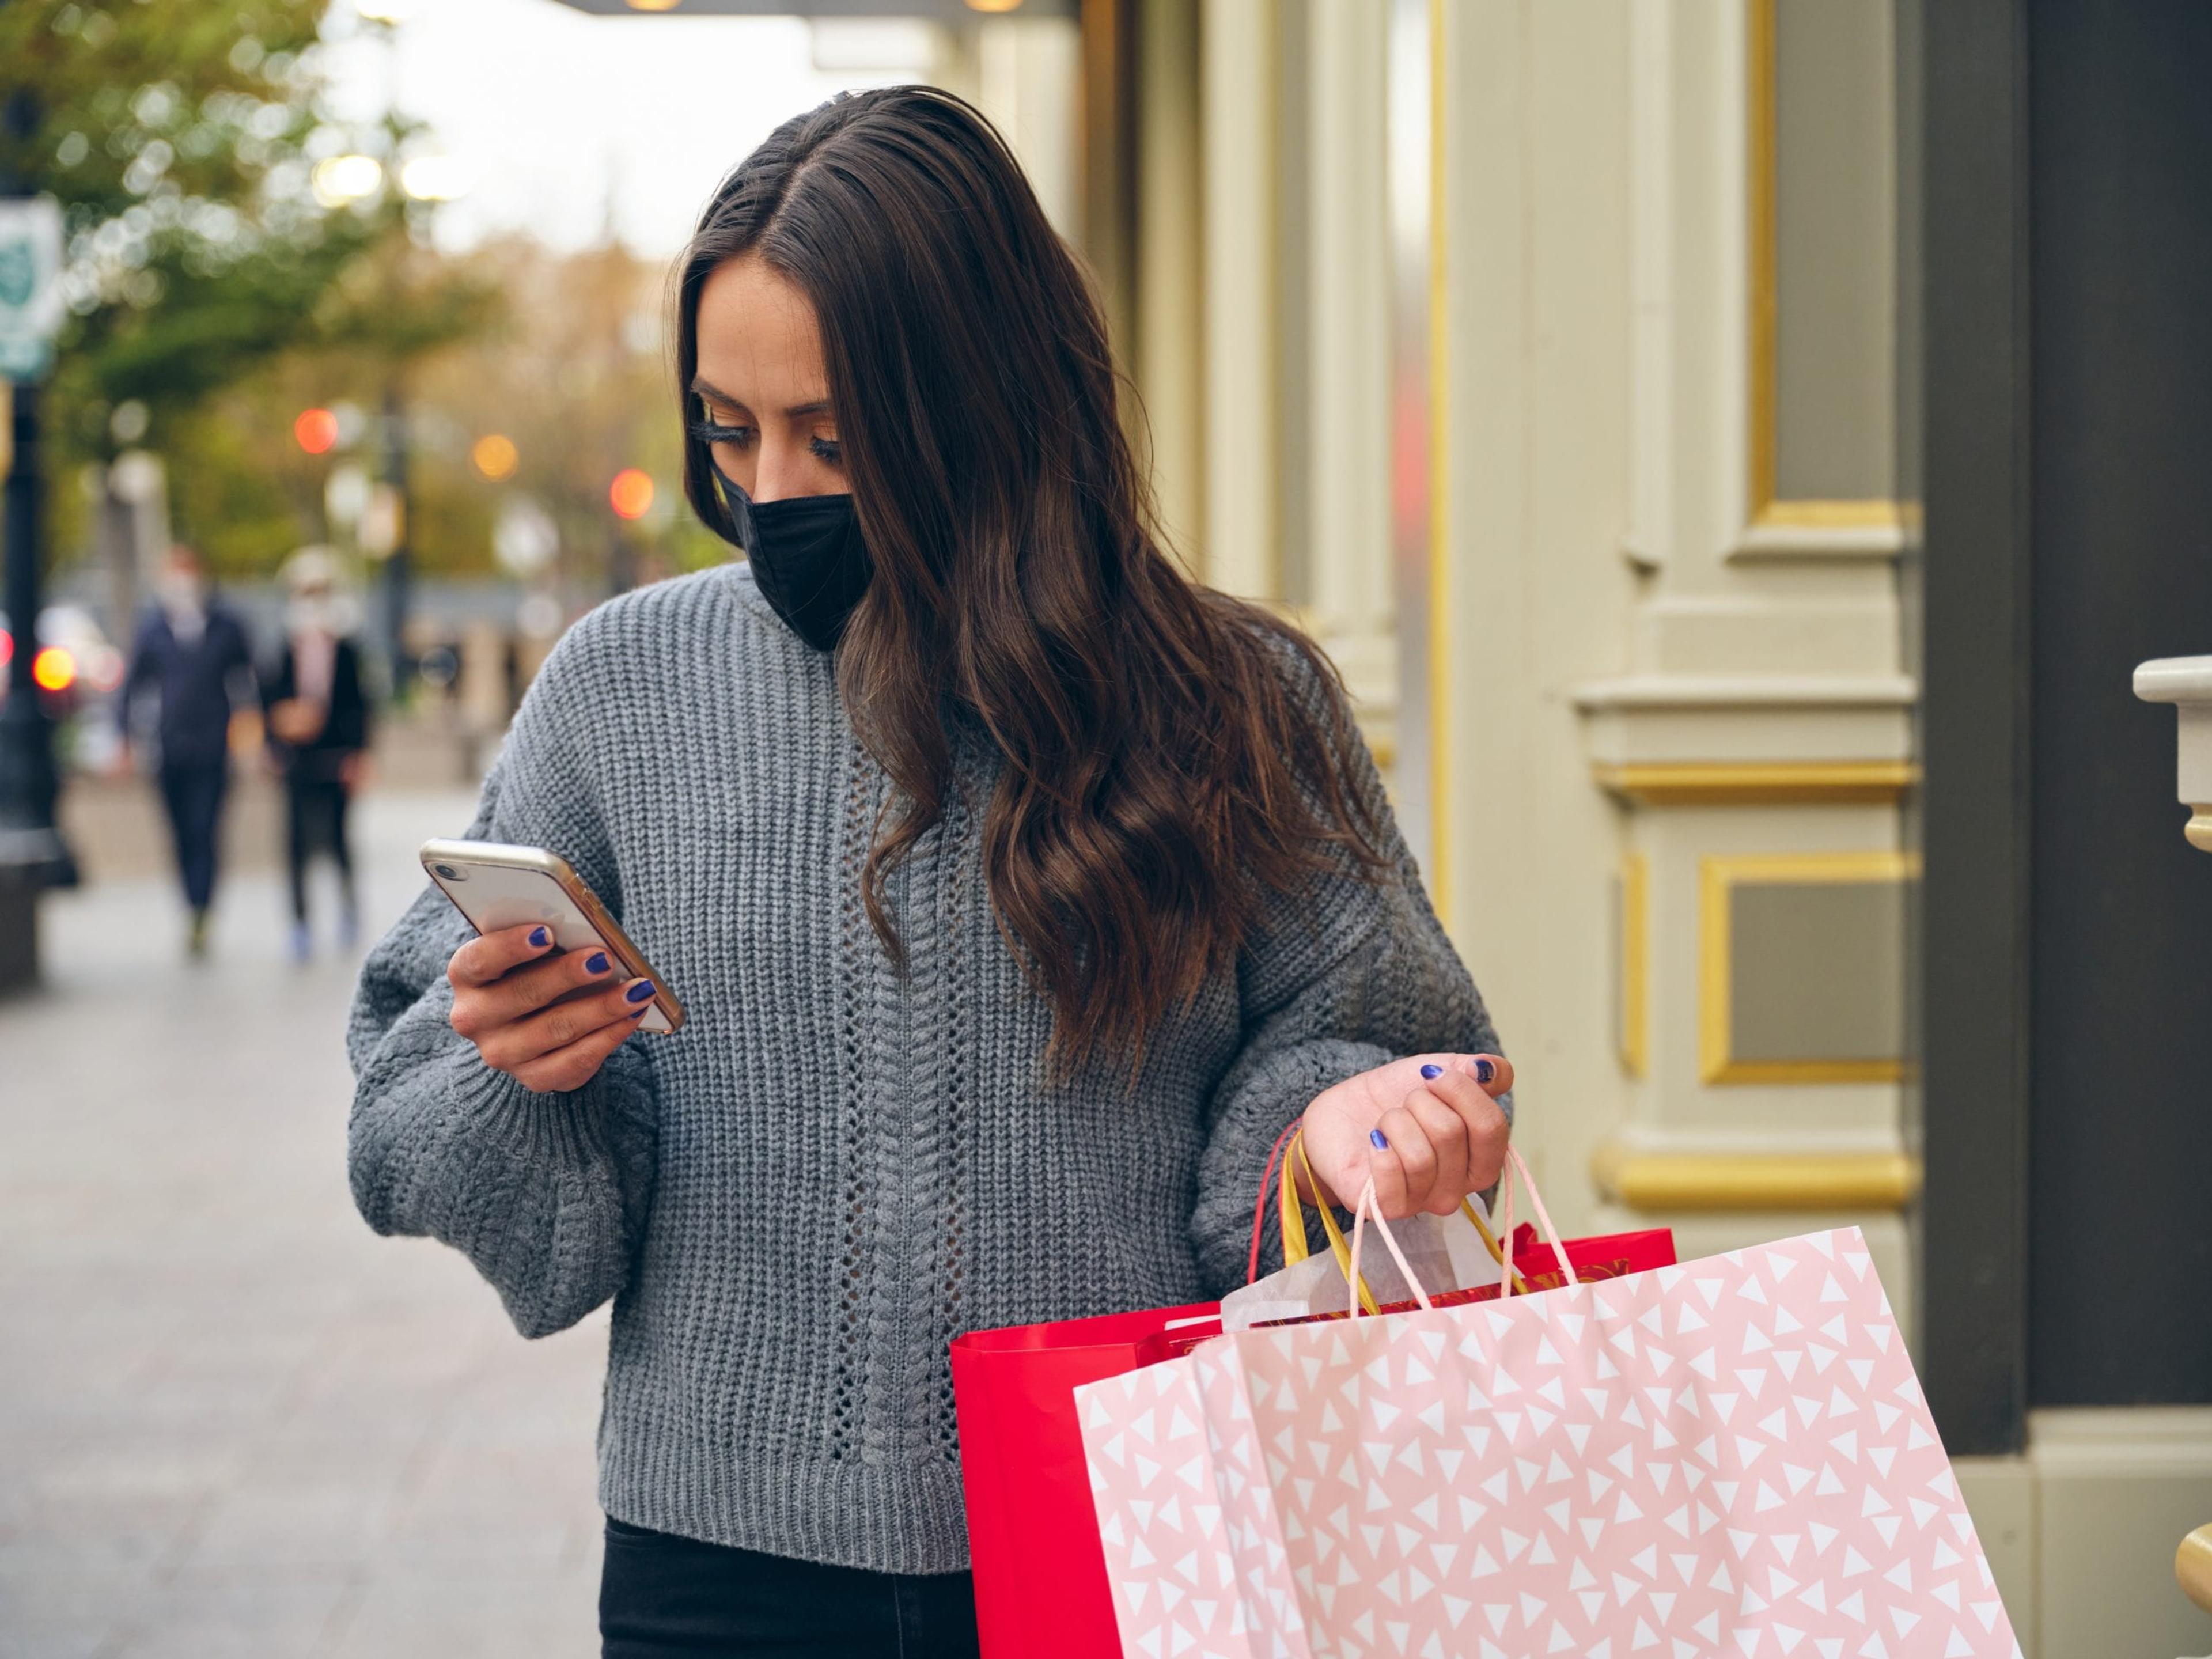 A young woman, shopping in a downtown area wearing facemasks for protection.